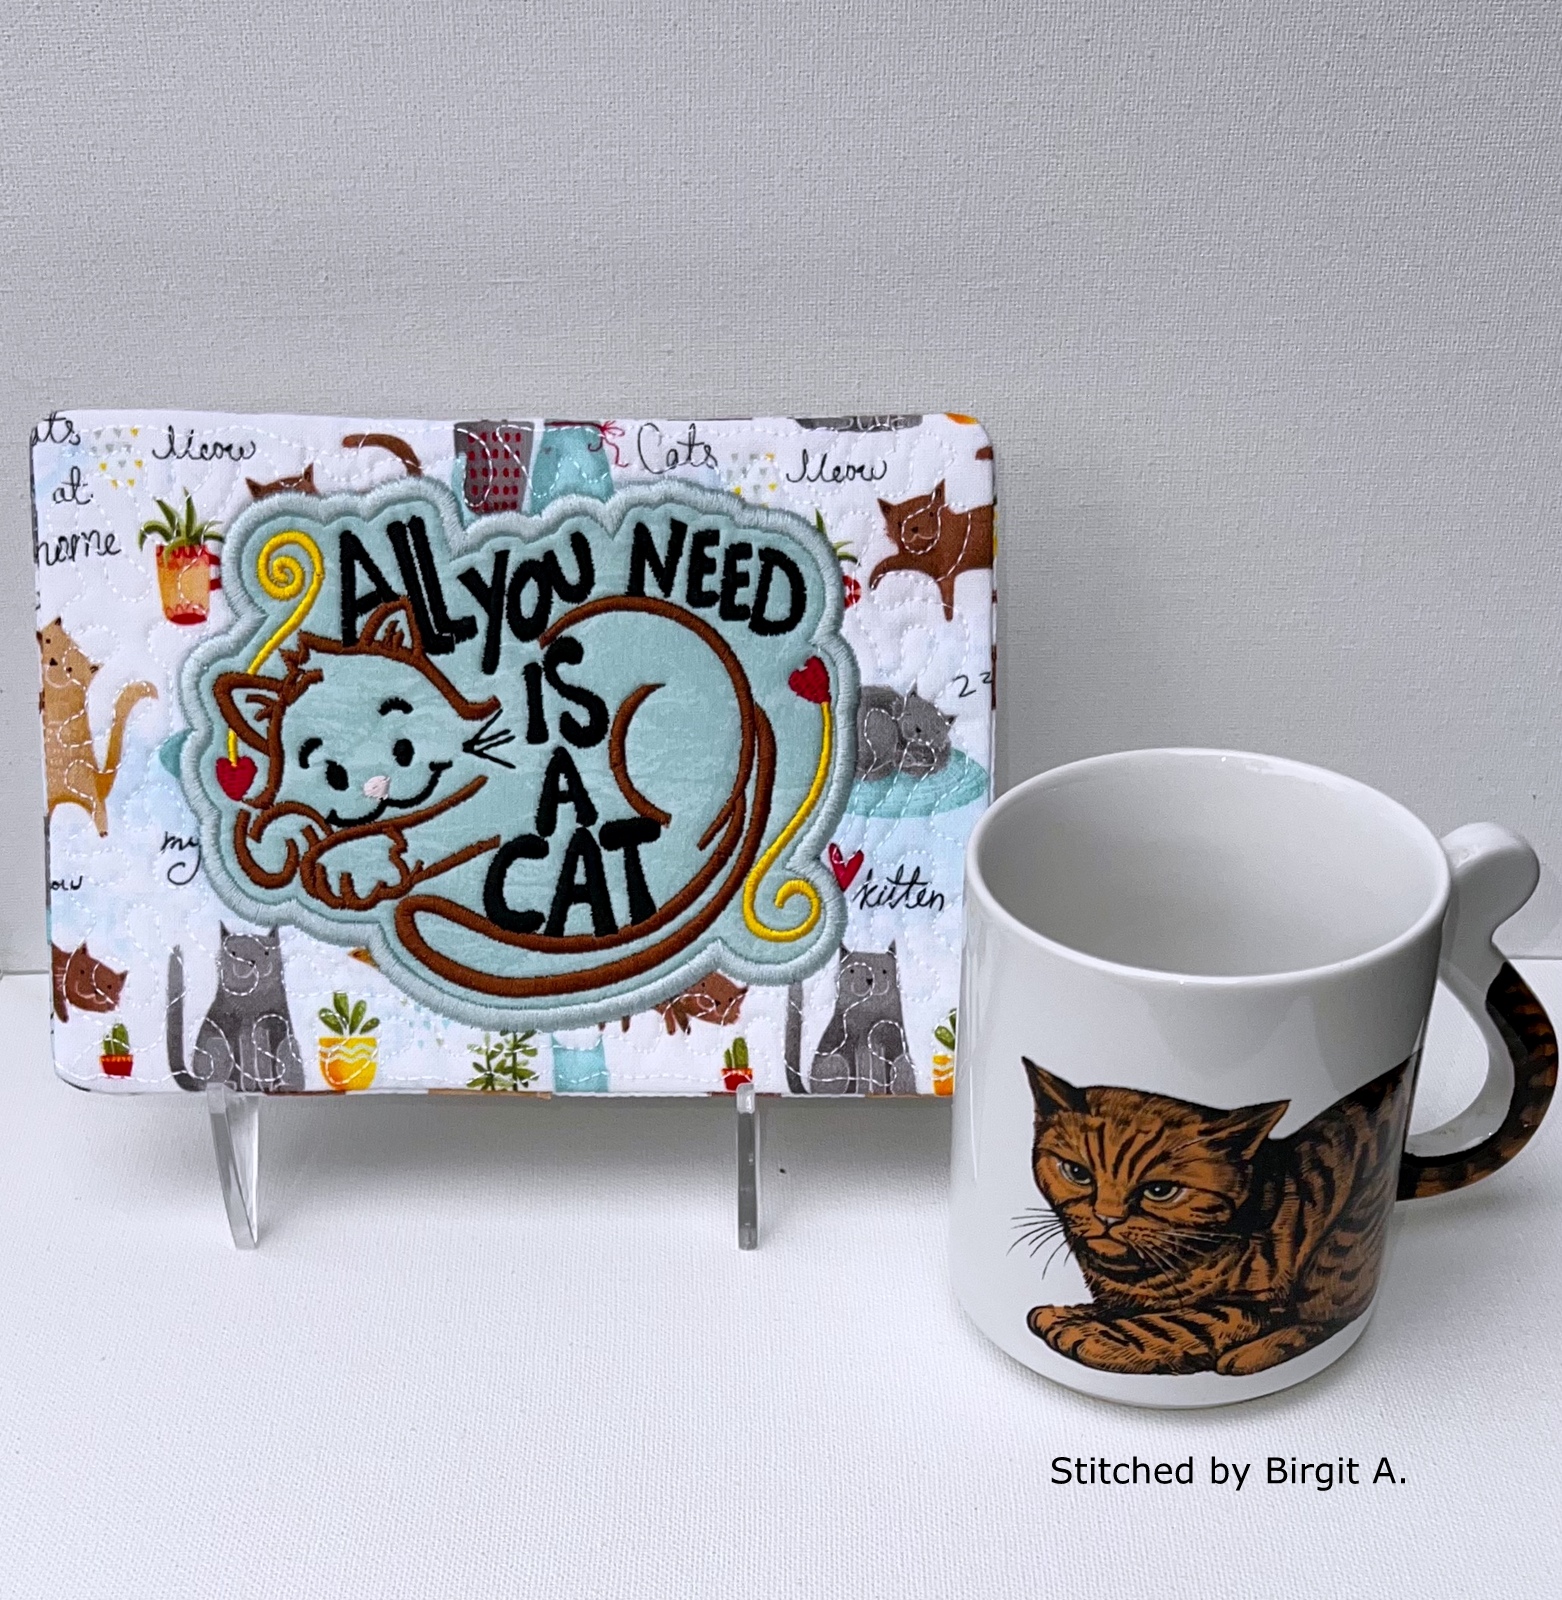 All You Need is a Cat Mug Rug-10